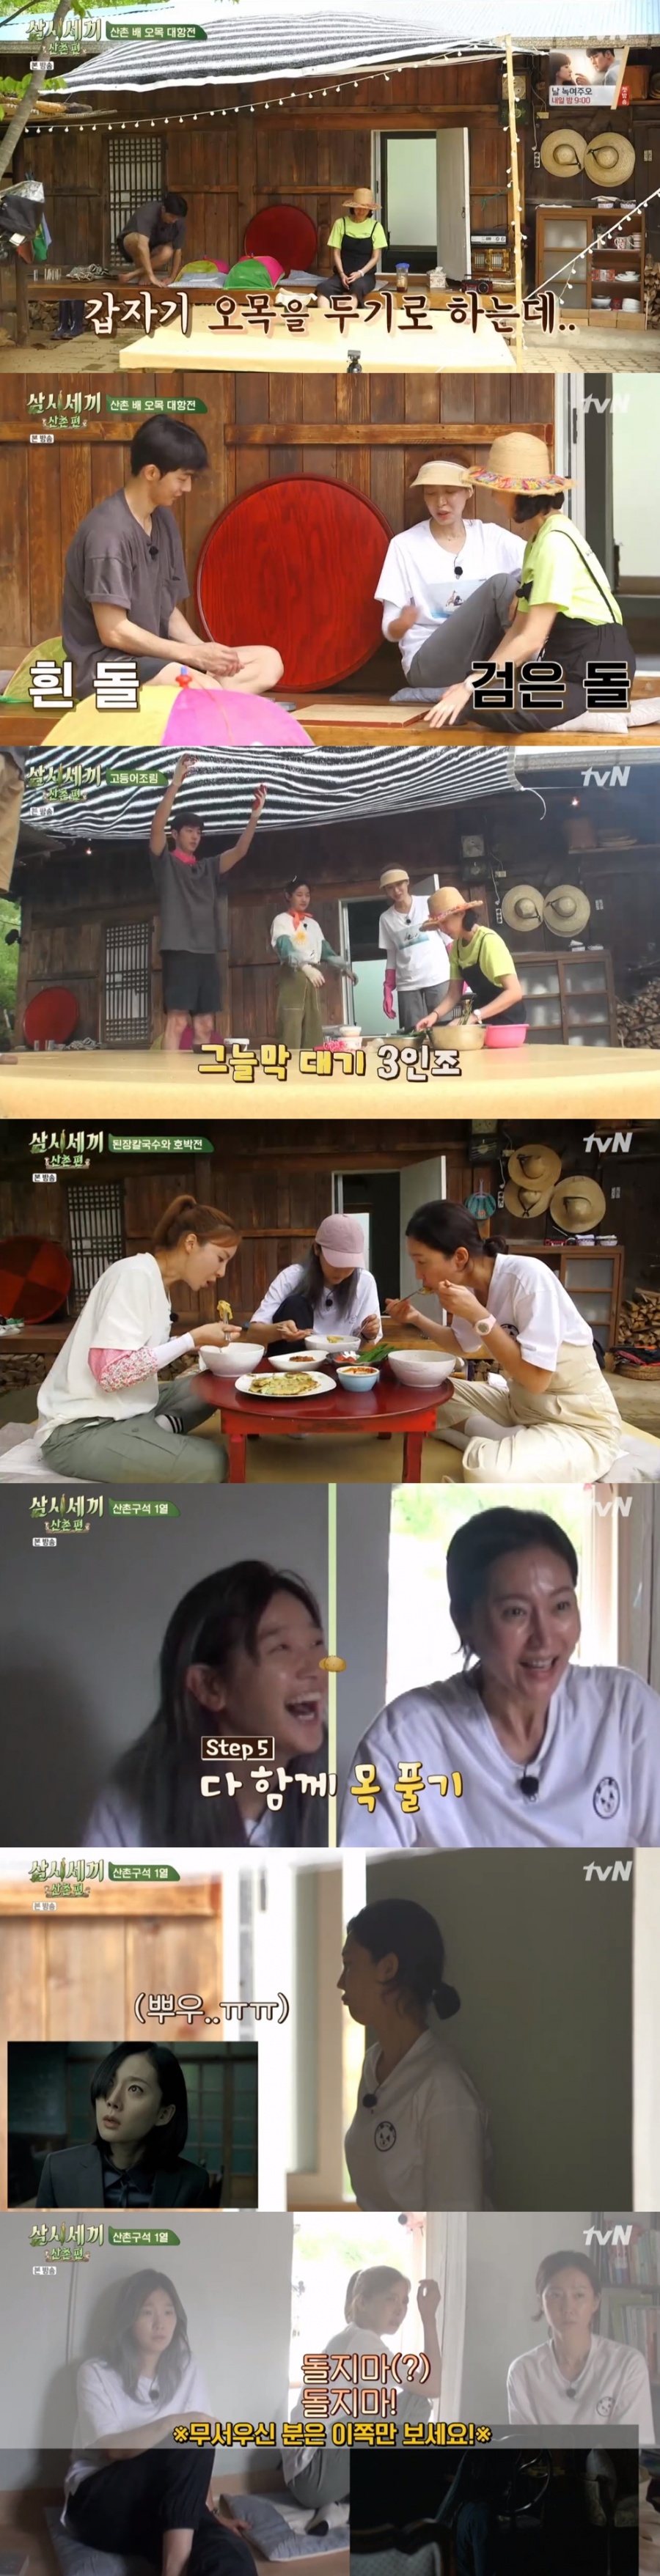 TVN Three Meals a Day Mountain Village members watched Janghwa Hongryeon together.On the 27th TVN Three Meals a Day Mountain Village, Yum Jung-ah completed a pot of kimchi fried rice.On this day, Yum Jung-ah completed a huge amount of kimchi fried rice to eat for breakfast.When Nam Joo-hyuk was surprised at the amount that even the staff could eat together, Yoon Se-ah laughed, saying it was everyday dinner.After the meal there was a concave confrontation: Yum Jung-ah won against Nam Joo-hyuk with an unwavering mentality, but it was not enough for the exceptionally concave Yoon Se-ah.Then challenged Nam Joo-hyuk was also quickly defeated by Yoon Se-ah and begged for another chance.The lunch menu was Horsefish, but while preparing for the afforestation, Yum Jung-ah stood in front of the ingredients and said, What are we doing now?I laughed with a strangeness, but a finished lunch made everyone admire.Yum Jung-ah, Yoon Se-ah and Park So-dam, who gathered again, were surprised by the garden that changed as autumn approached.And I wondered about the fact that two guests would come to the day when autumn came.After filling the ship with miso kalguksu and Jeon, a music party was held with the sound of rain in the rainy mountain village, and then watched Janghwa Hongryeon starring Yum Jung-ah together.Yoon Se-ah was surprised at the young face by watching Yum Jung-ah in the early 30s in the movie, while Park So-dam left a commemorative photo with Yum Jung-ah to see Janghwa Hongryeon.Yum Jung-ah showed his extraordinary point of view by looking at his acting, while Yoon Se-ah and Park So-dam screamed in fear.After watching the movie, each talked about his appreciation.On the other hand, Park Seo-joon appeared as a guest in the preview and called for anticipation.